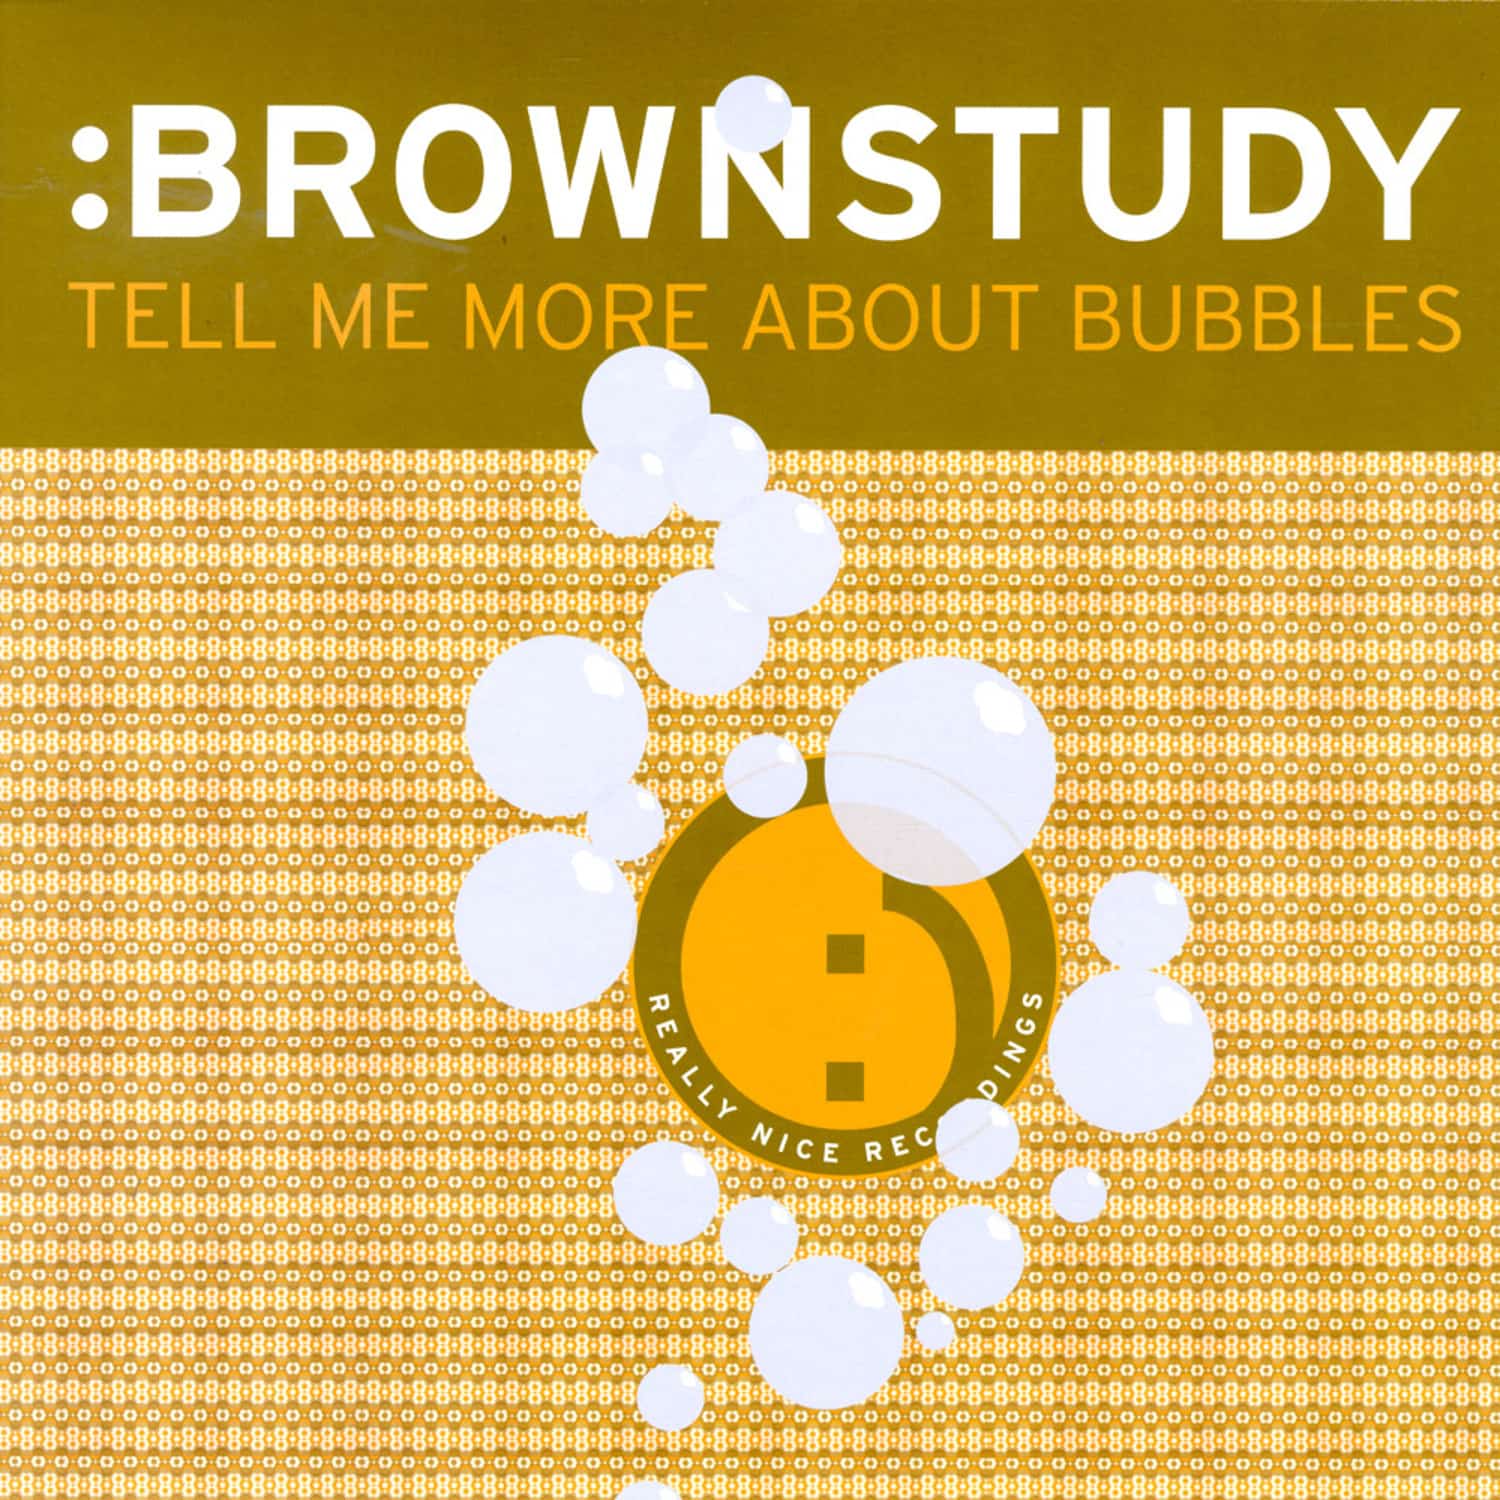 Brownstudy - TELL ME MORE ABOUT BUBBLES